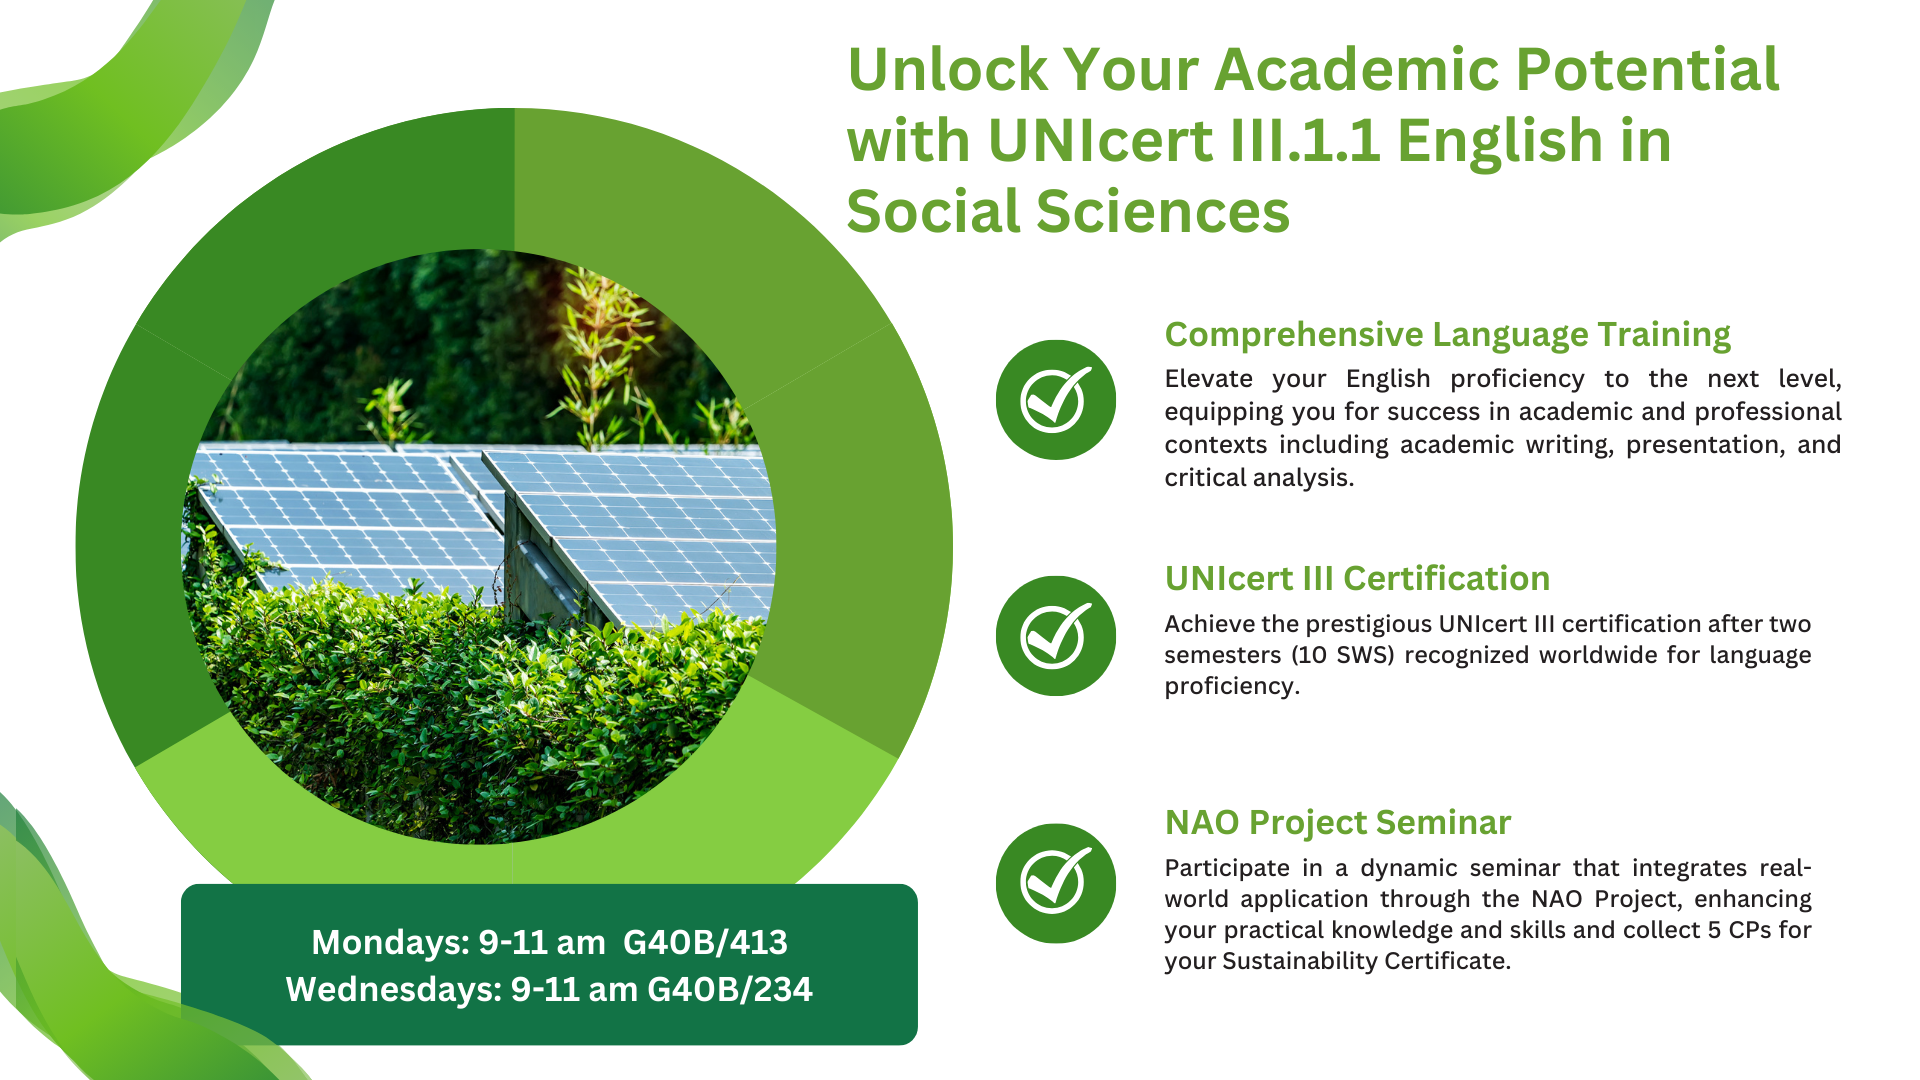 Unlock Your Academic Potential with UNIcert III.1.1 English in Social Sciences